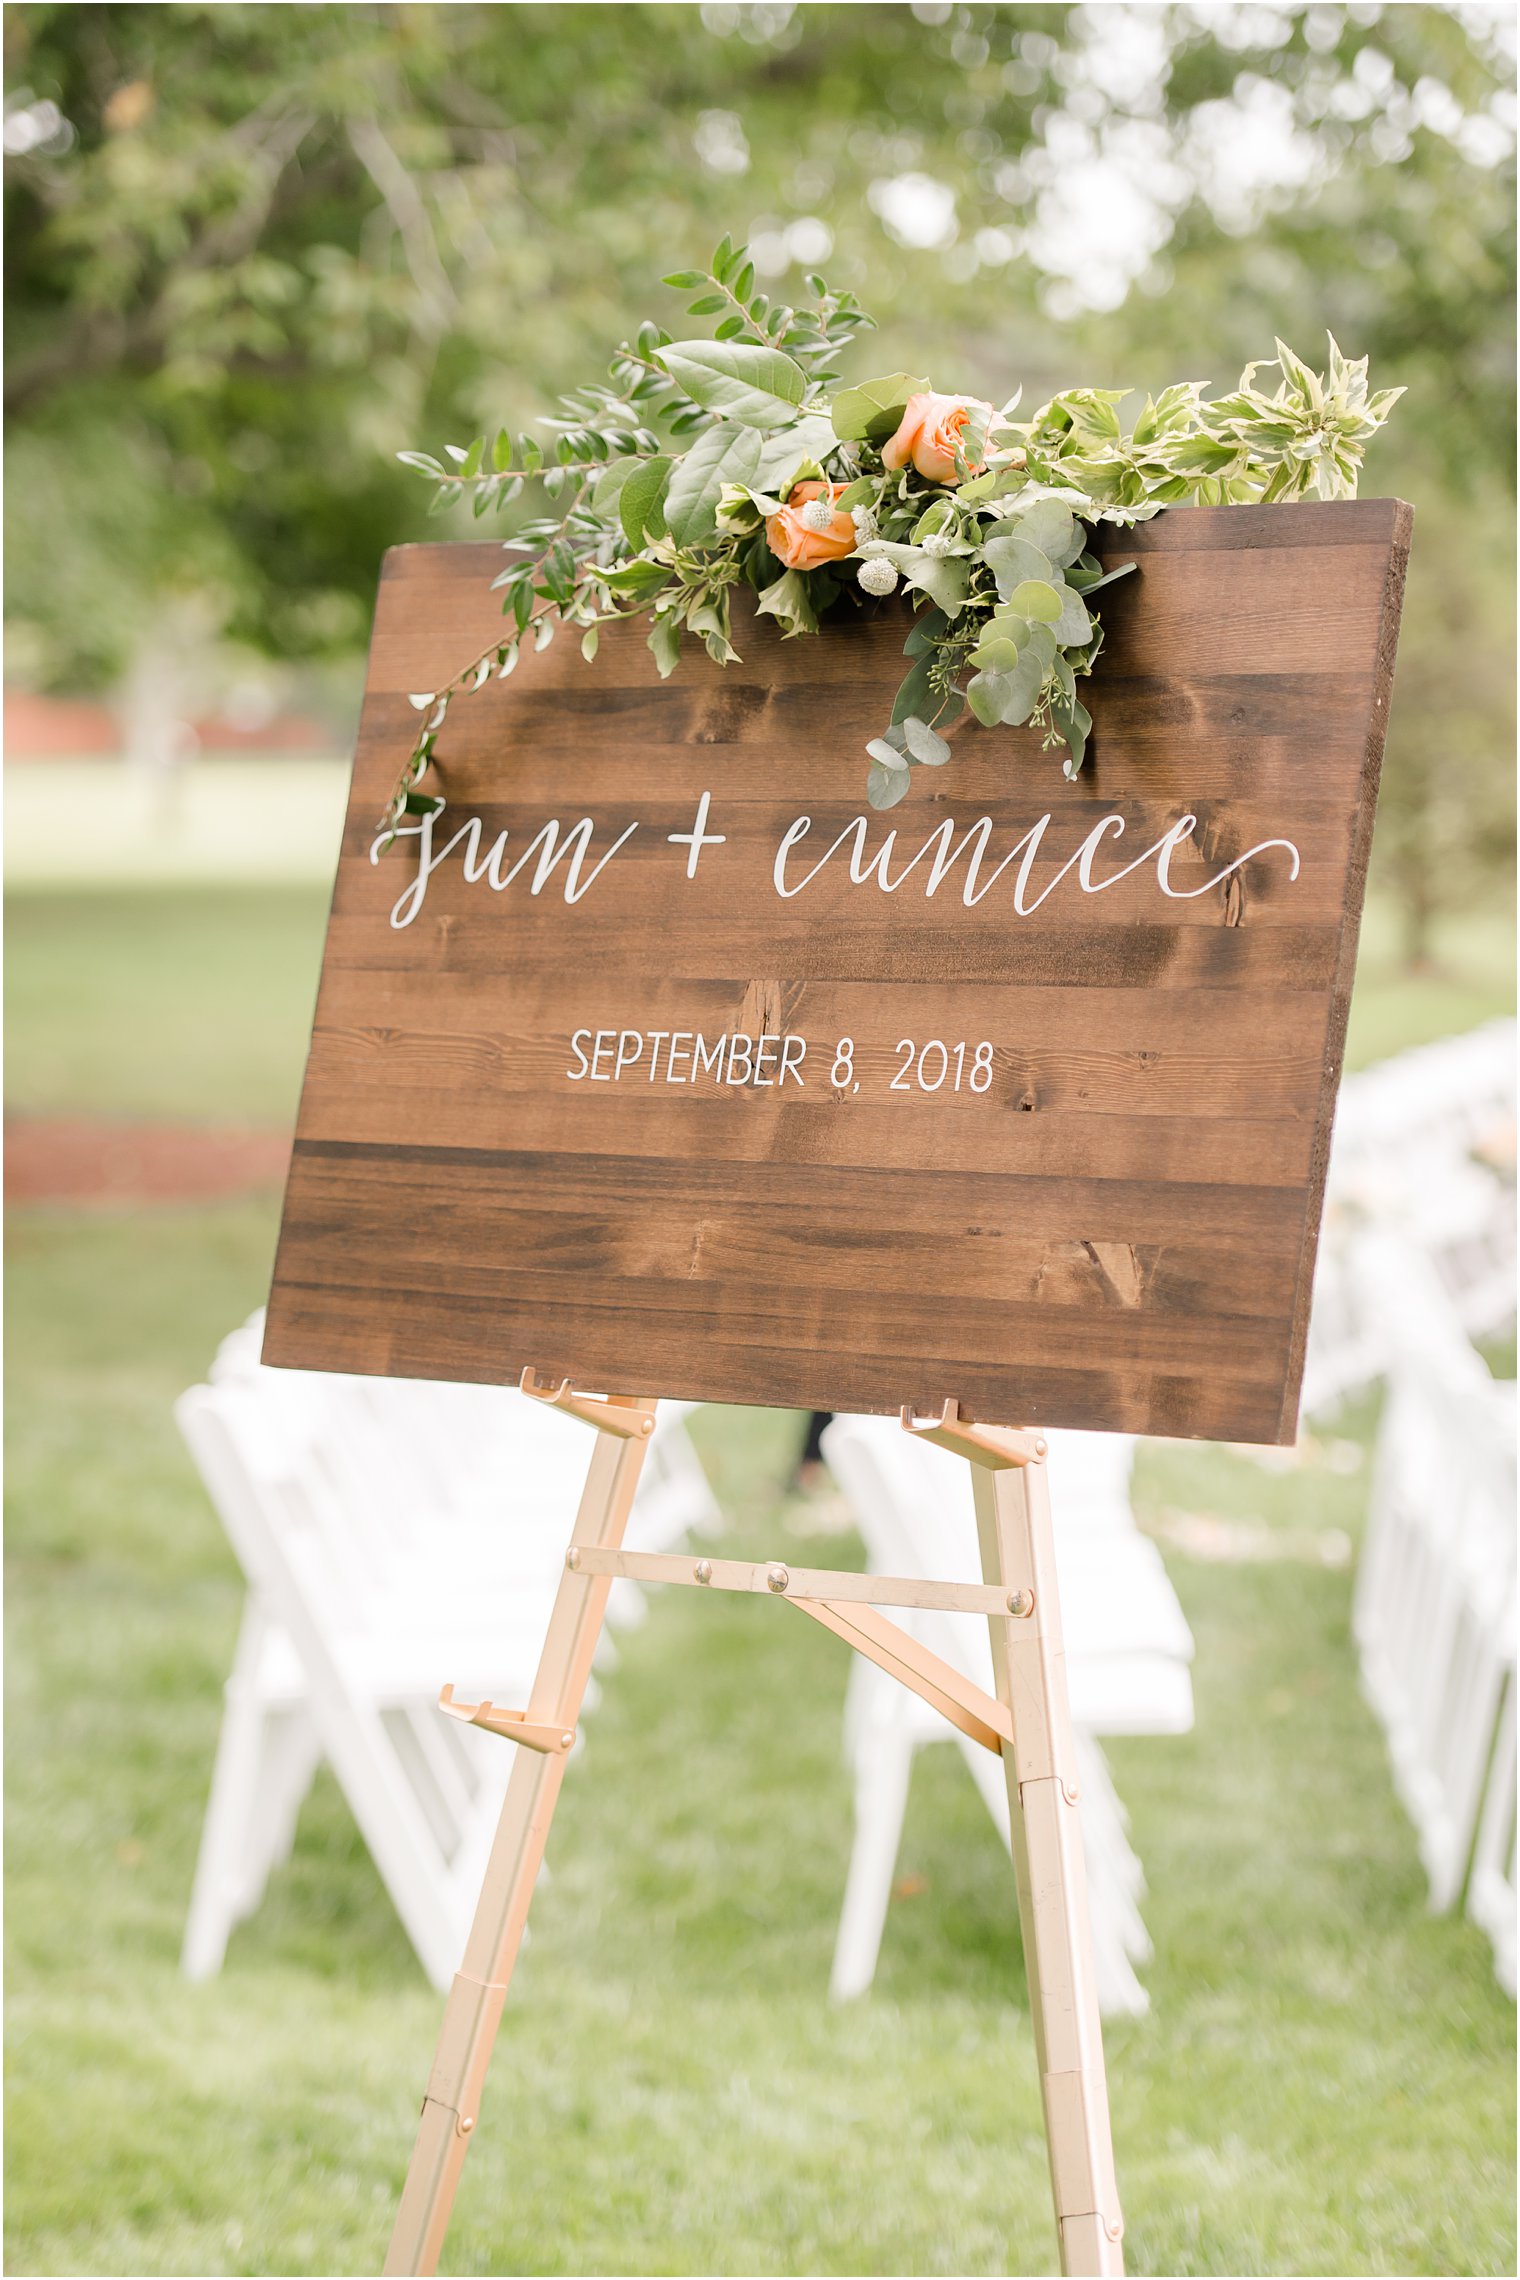 Wooden wedding signage by Peonia Atelier